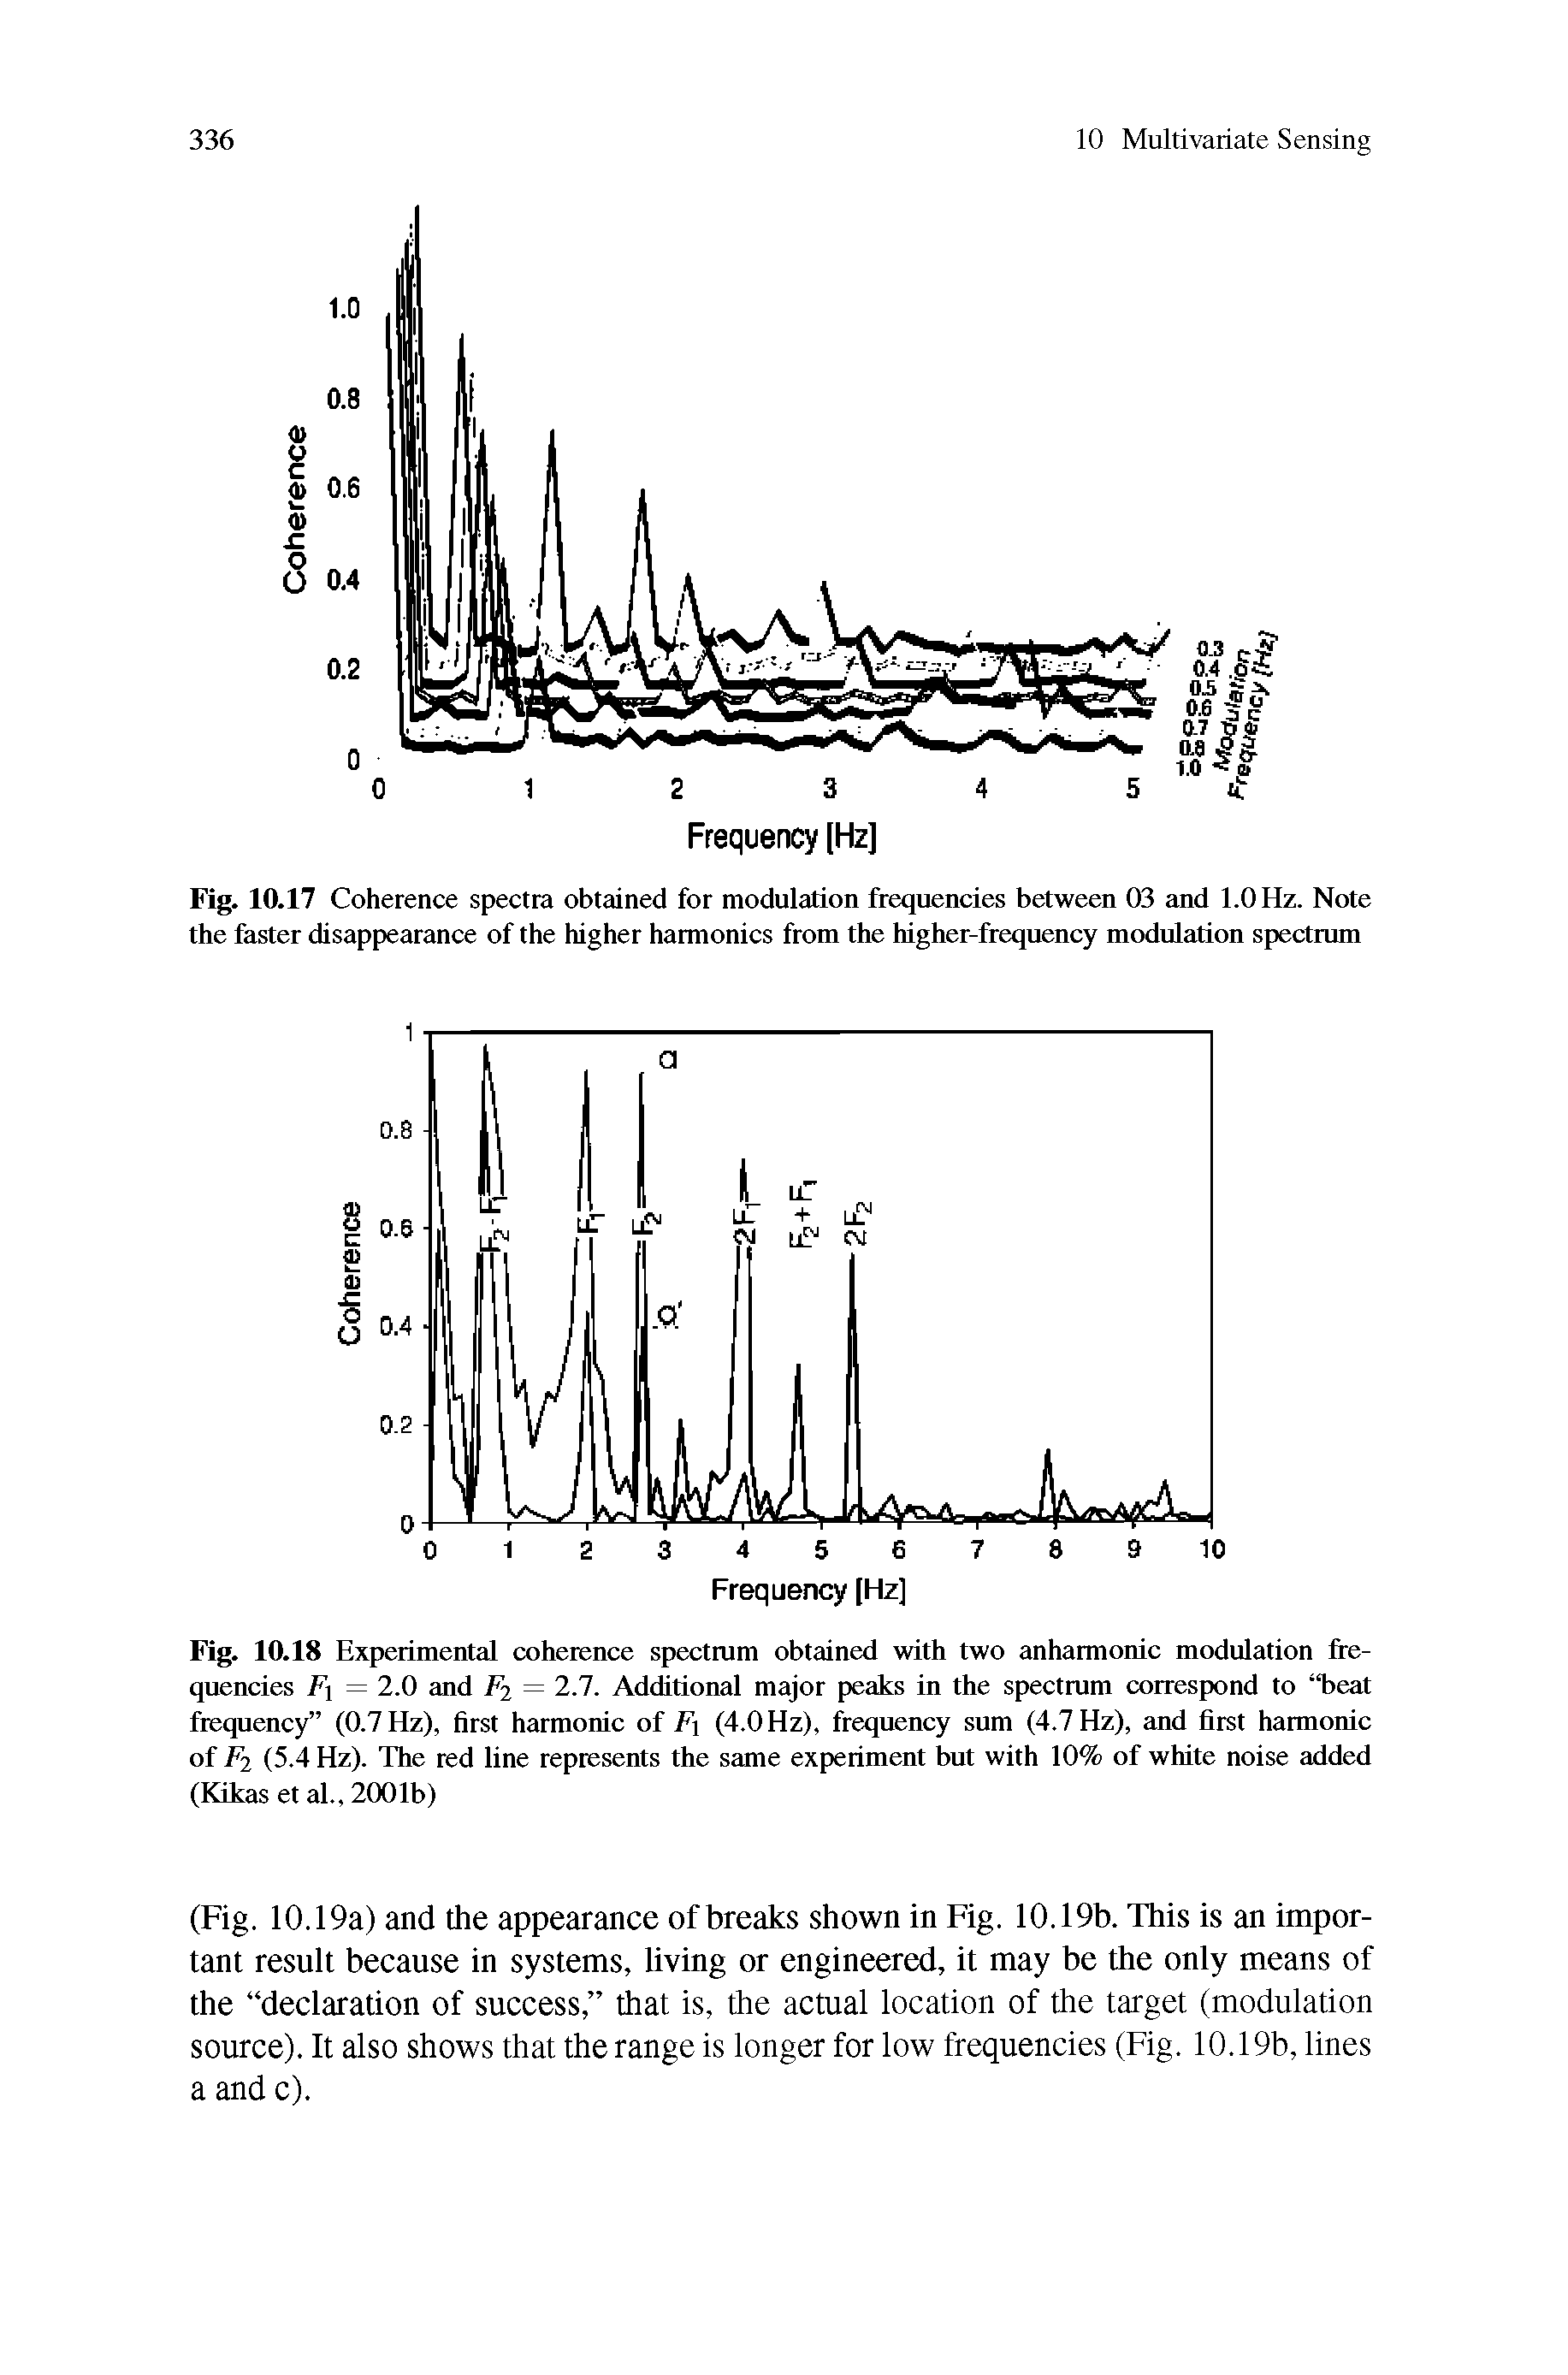 Fig. 10.18 Experimental coherence spectrum obtained with two anharmonic modulation frequencies I ] = 2.0 and I 2 = 2.7. Additional major peaks in the spectrum correspond to beat frequency (0.7 Hz), first harmonic of I ) (4.0 Hz), frequency sum (4.7 Hz), and first harmonic of / 2 (5.4 Hz). The red line represents the same experiment but with 10% of white noise added (Kikas et al., 2001b)...